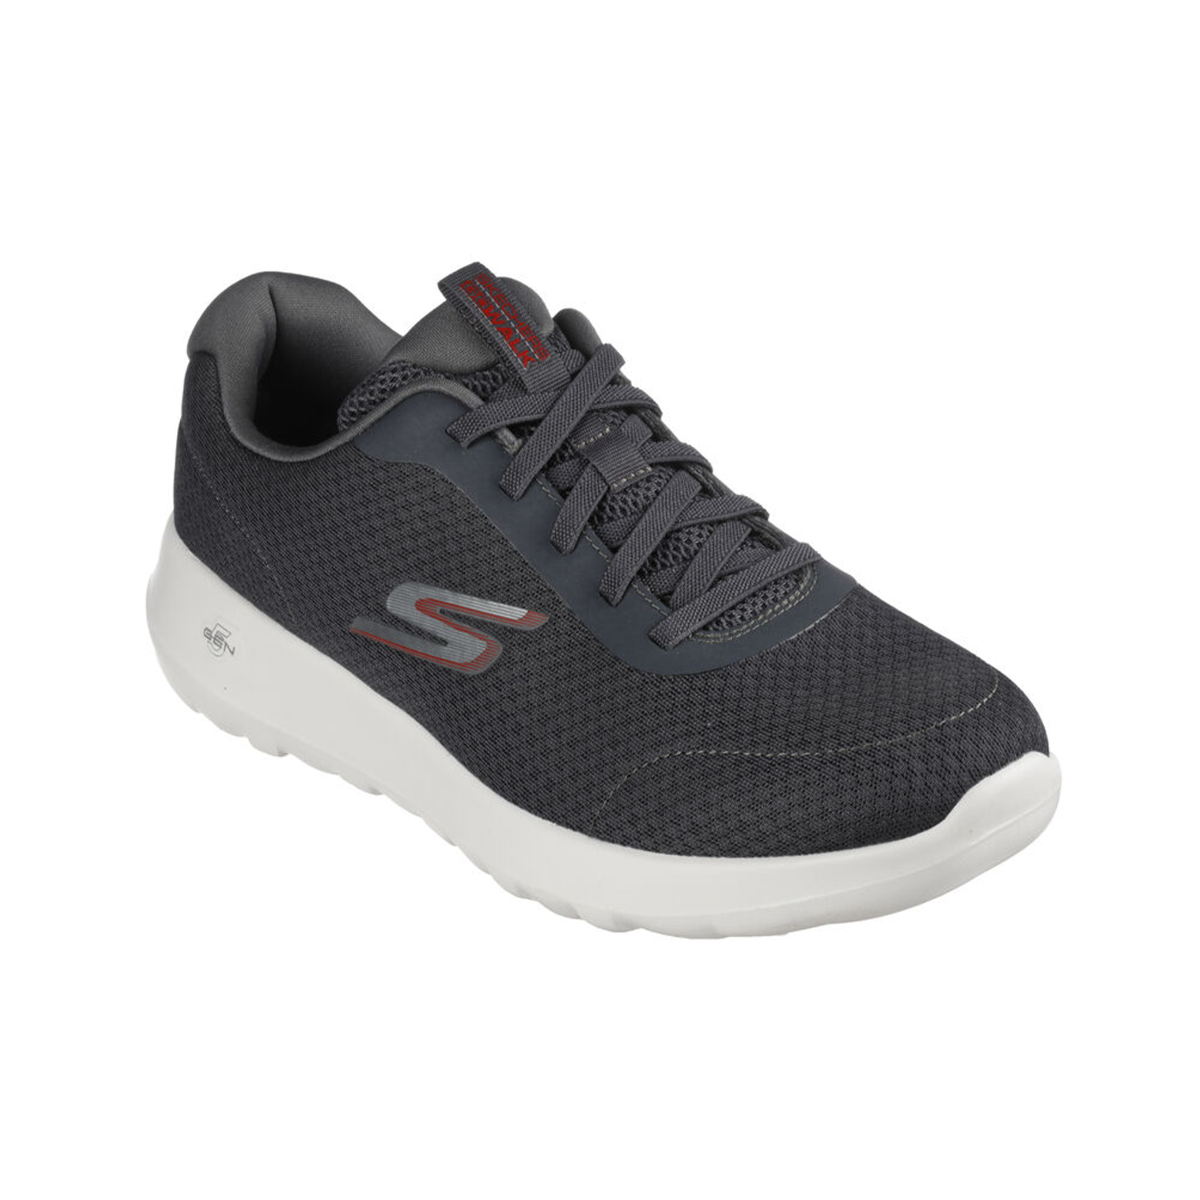 Skechers Go Walk Max Midshore Shoes For Men, Charcoal & Red